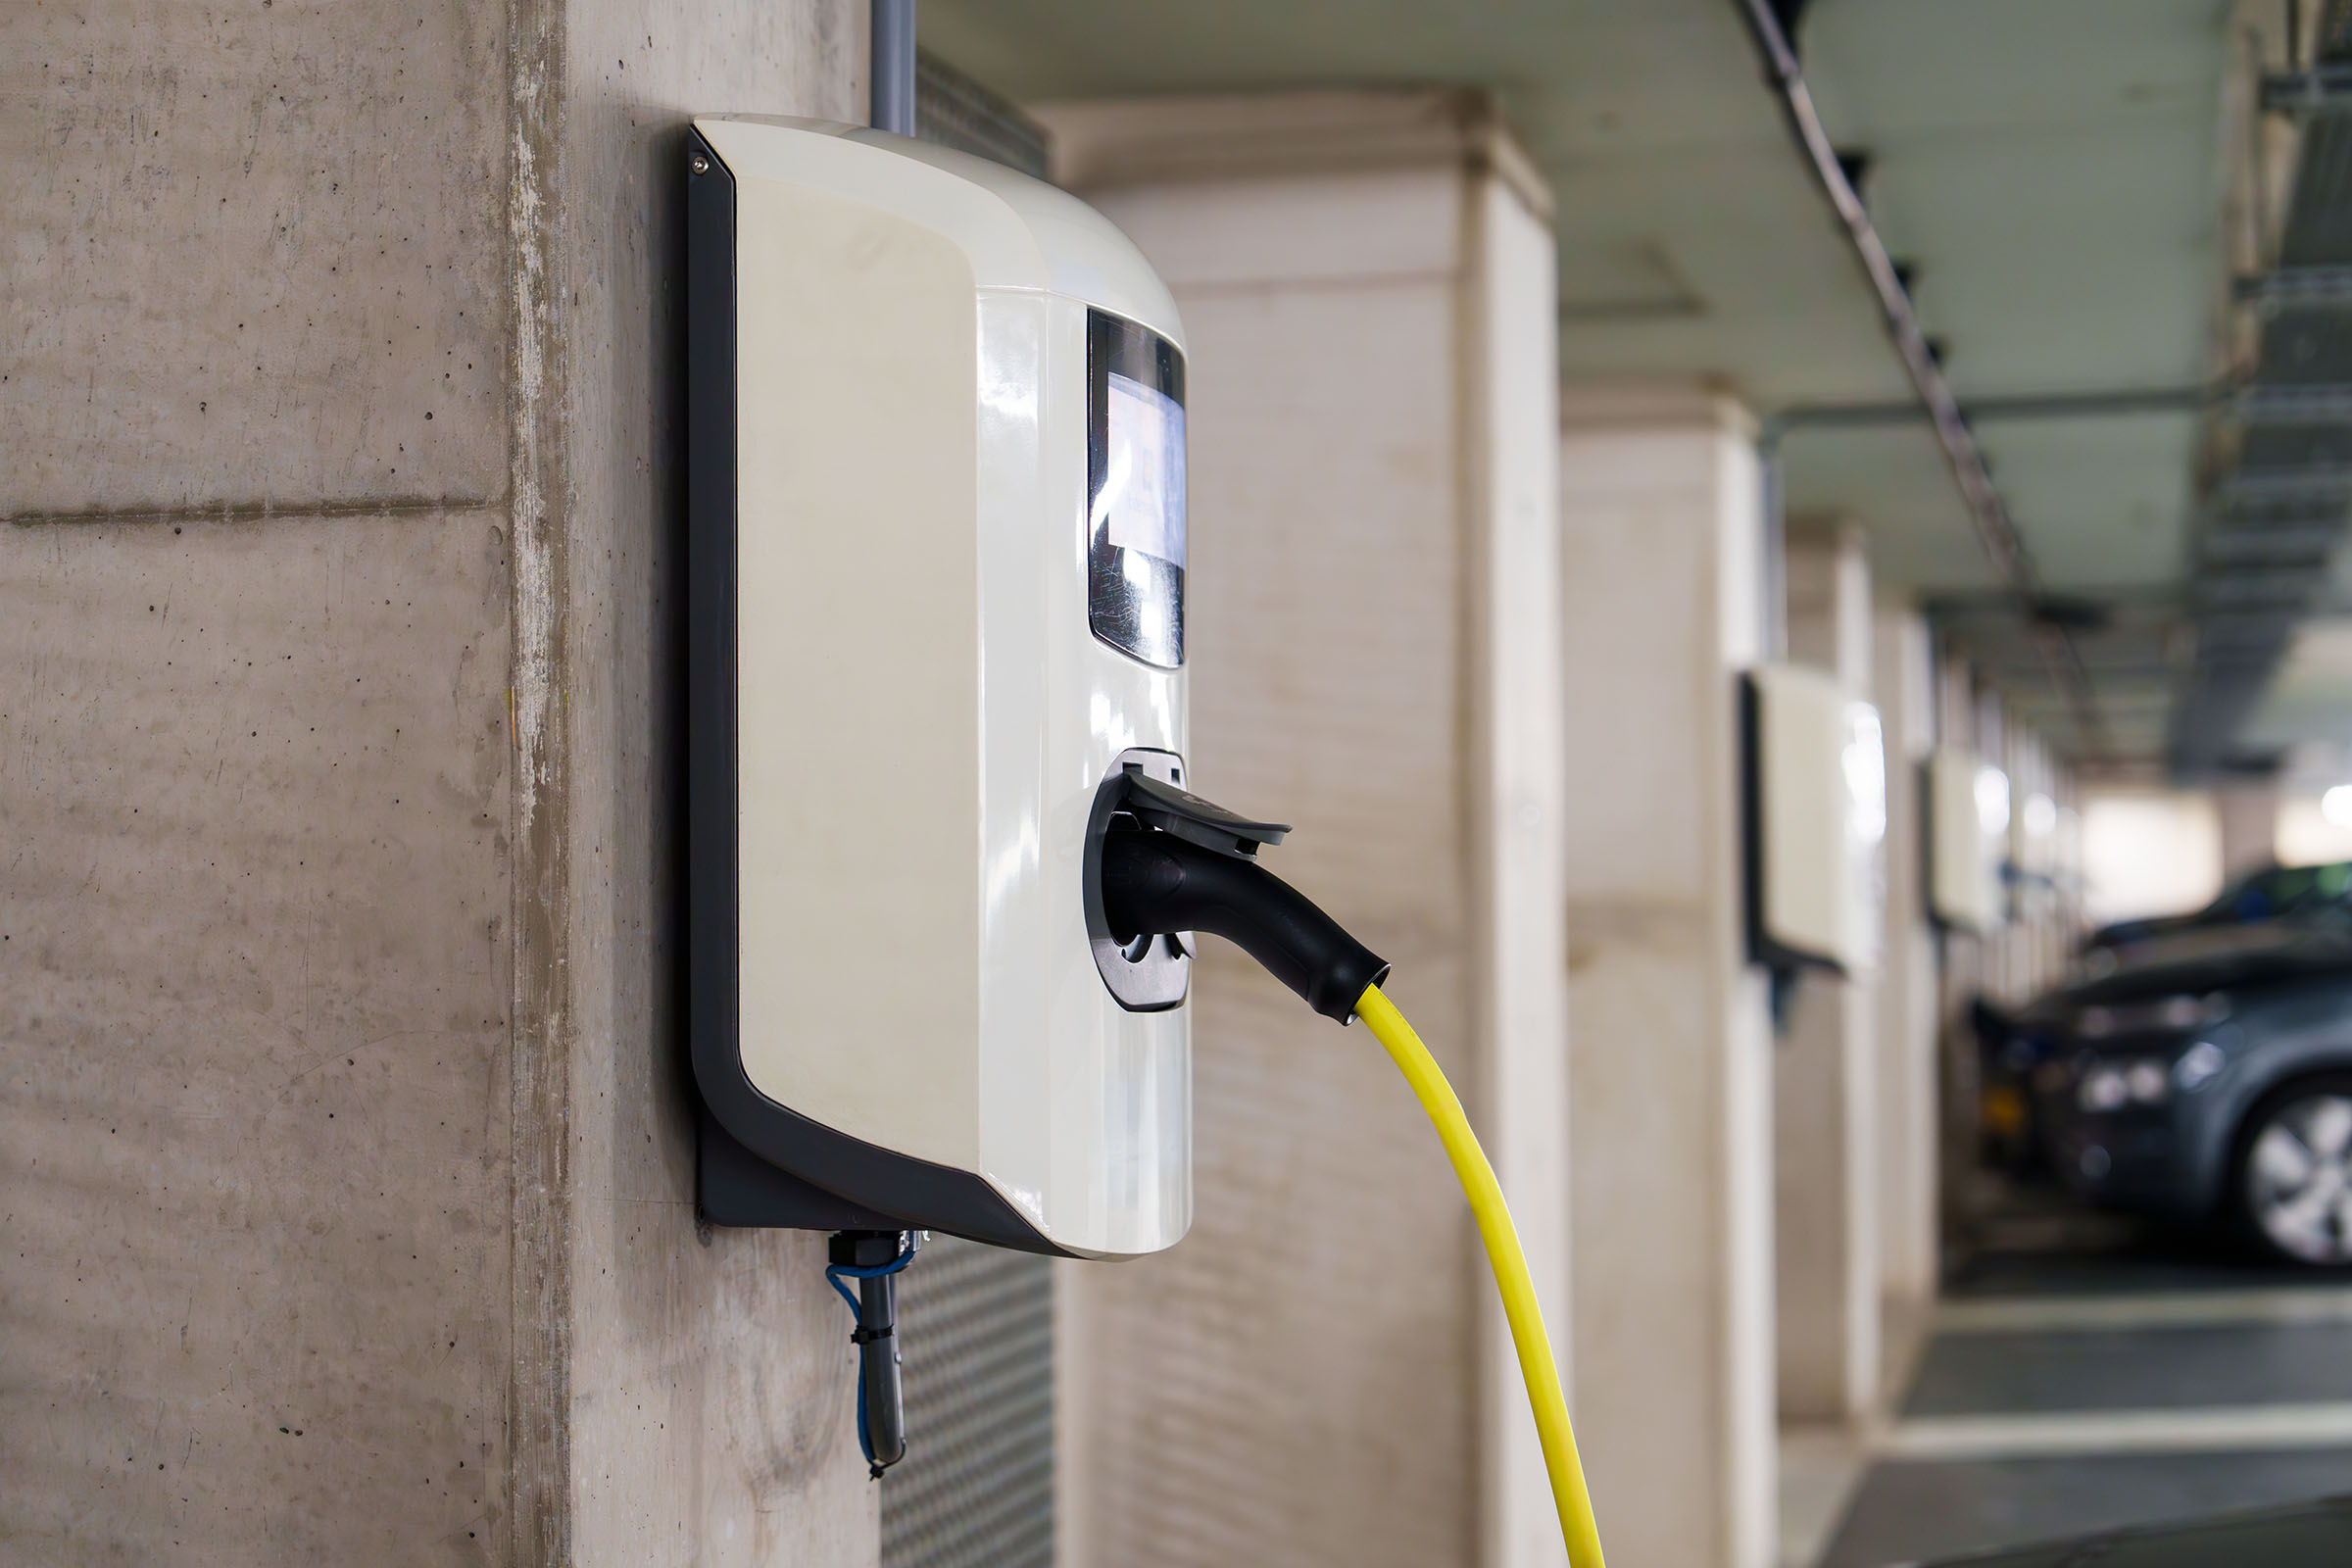 A single electric vehicle charging point mounted on a concrete column in a car park, in use and connected to a yellow charging cable.